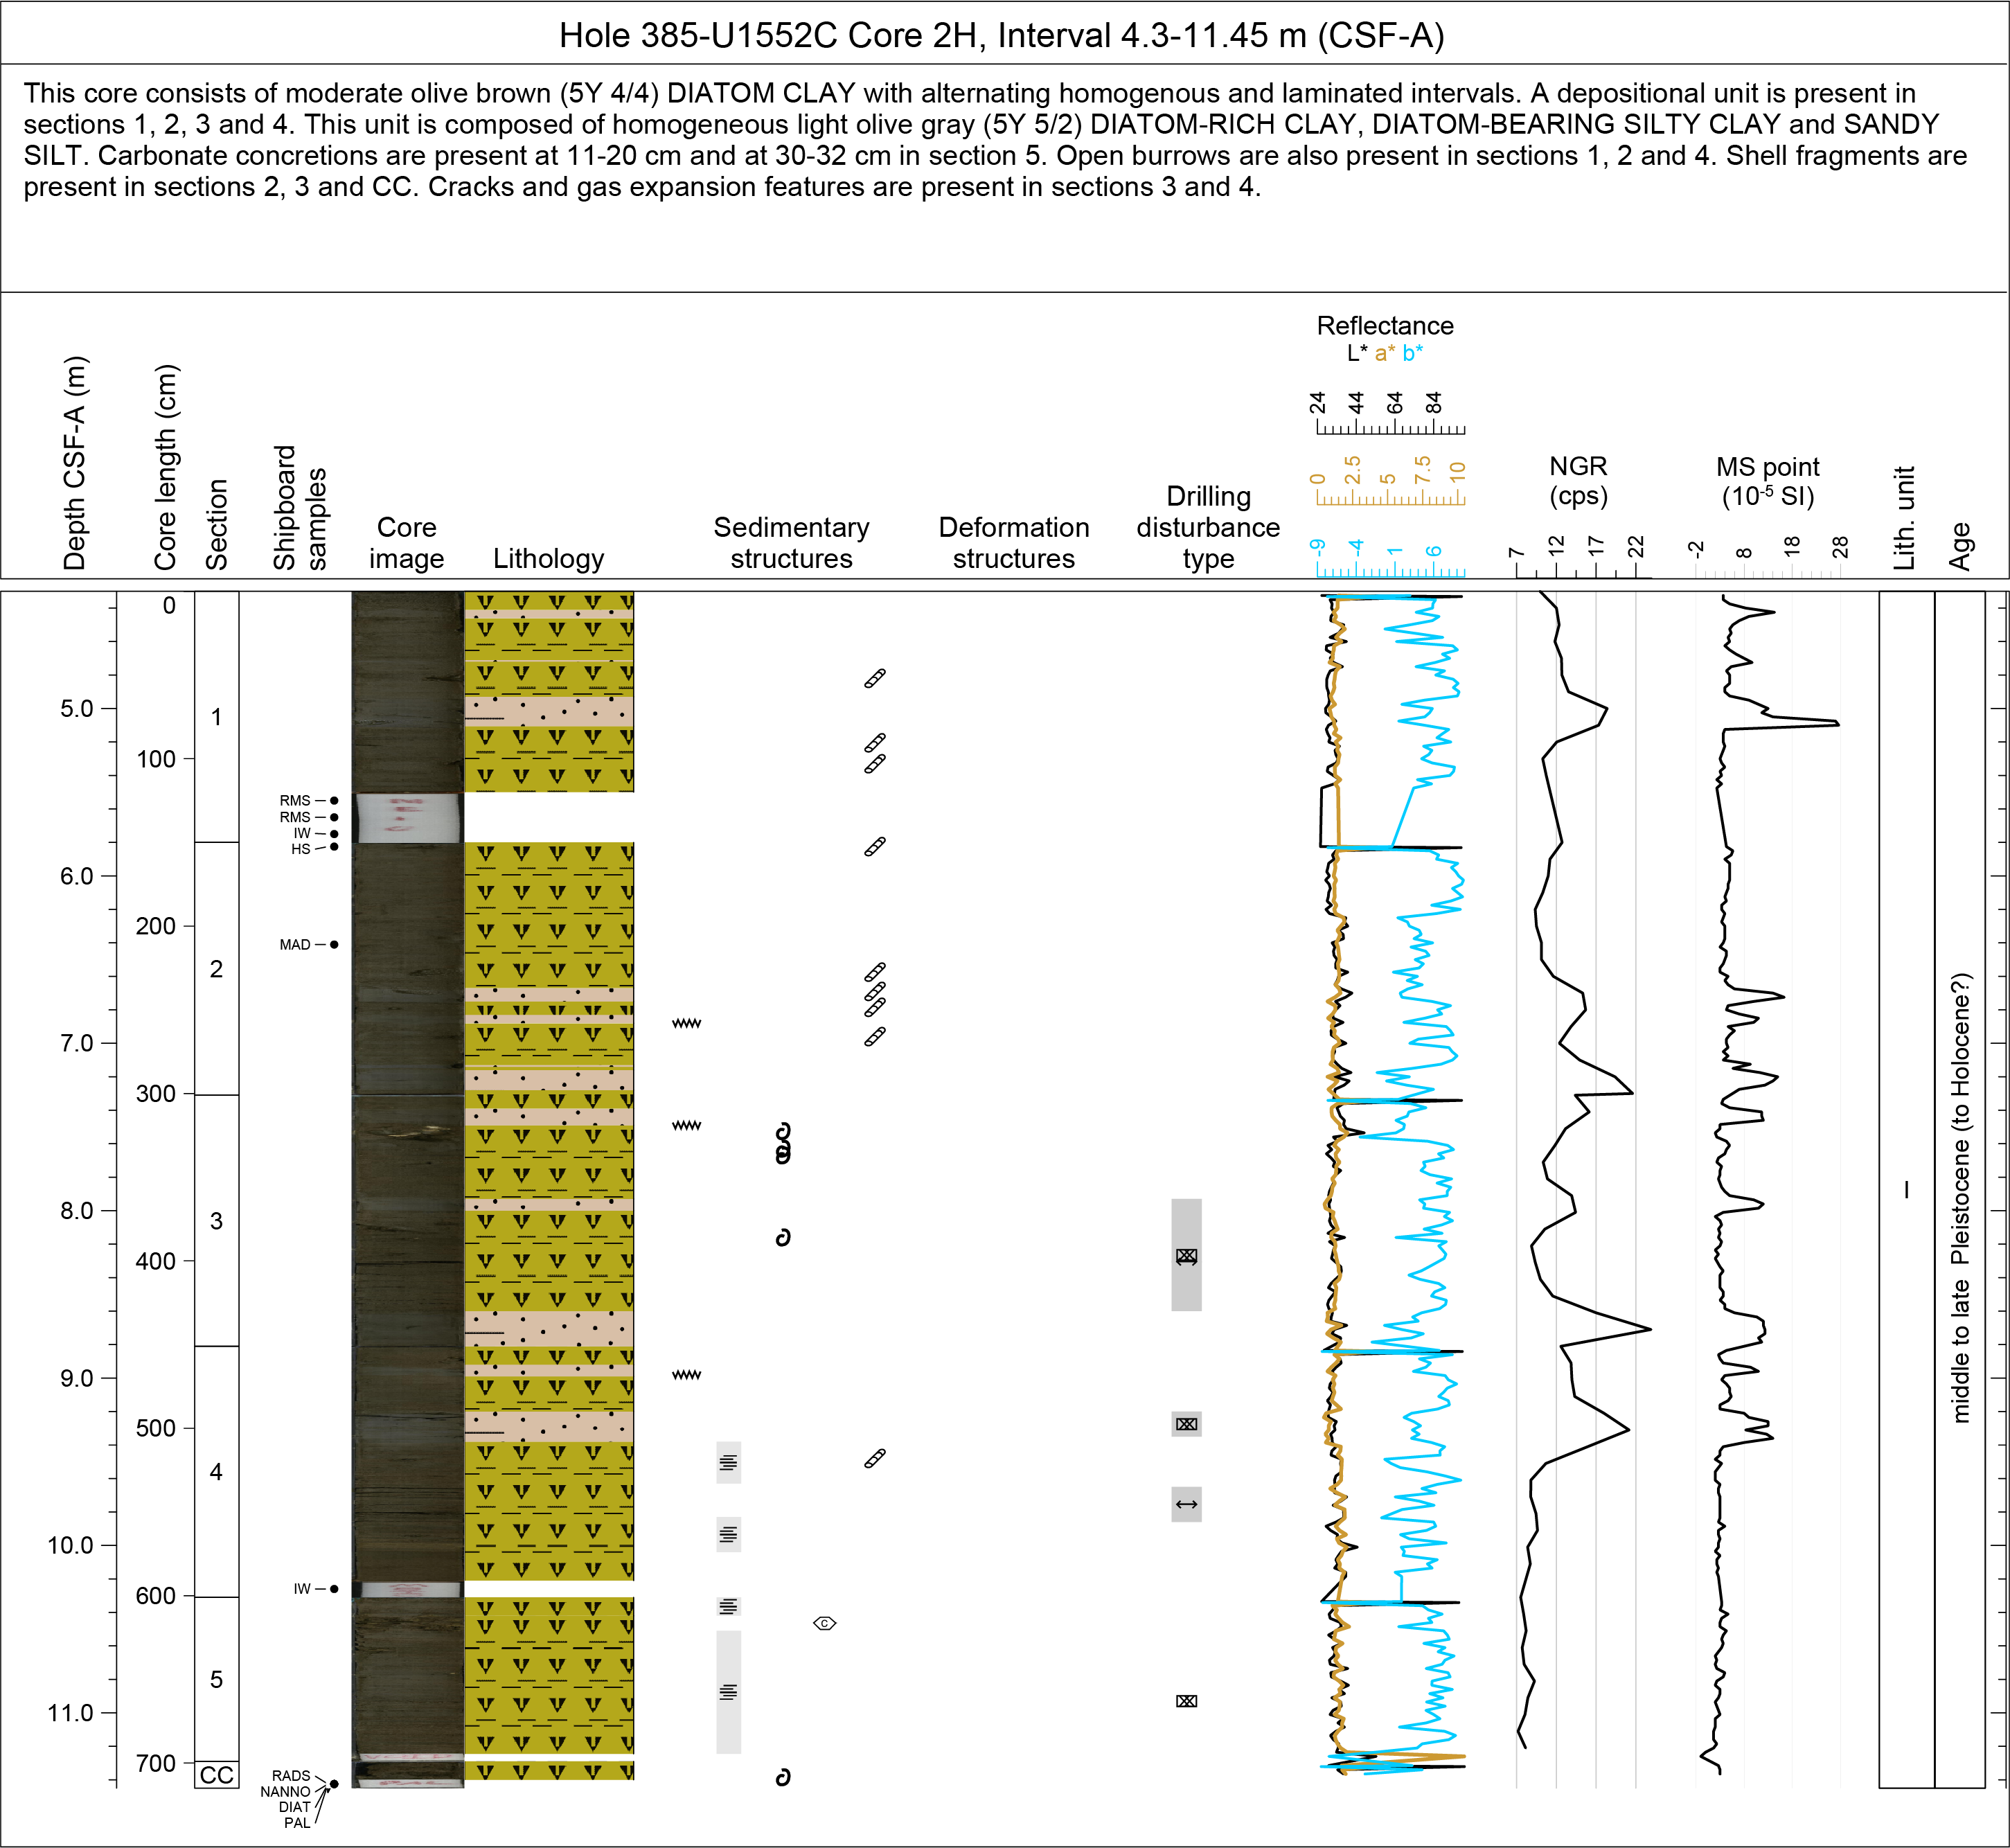 http://publications.iodp.org/proceedings/385/102/figures/385_102_F10.png